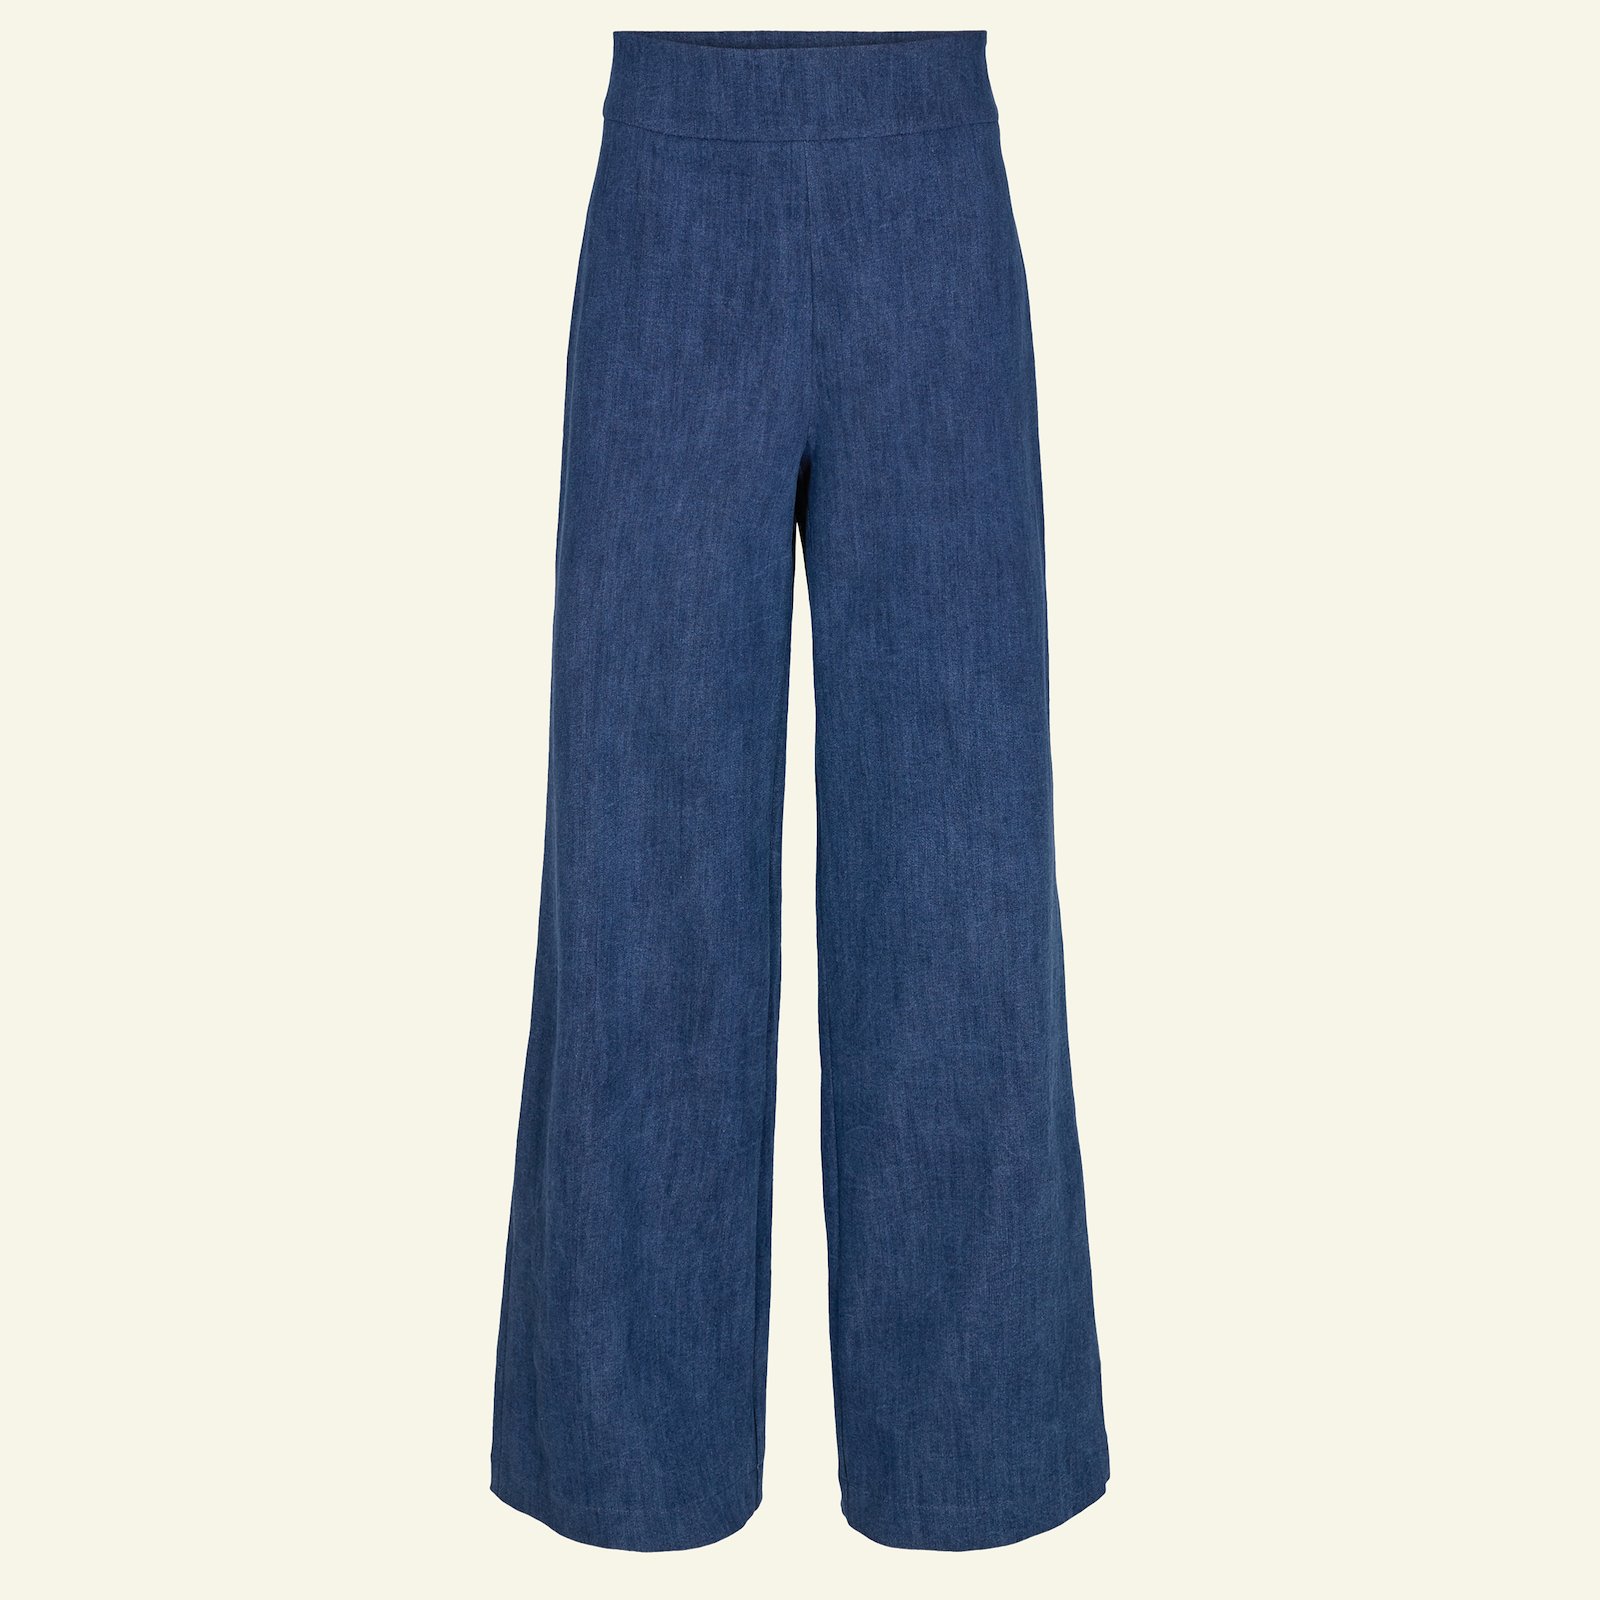 Highwaist and wide legs trousers, 34/6 p20052_460851_sskit